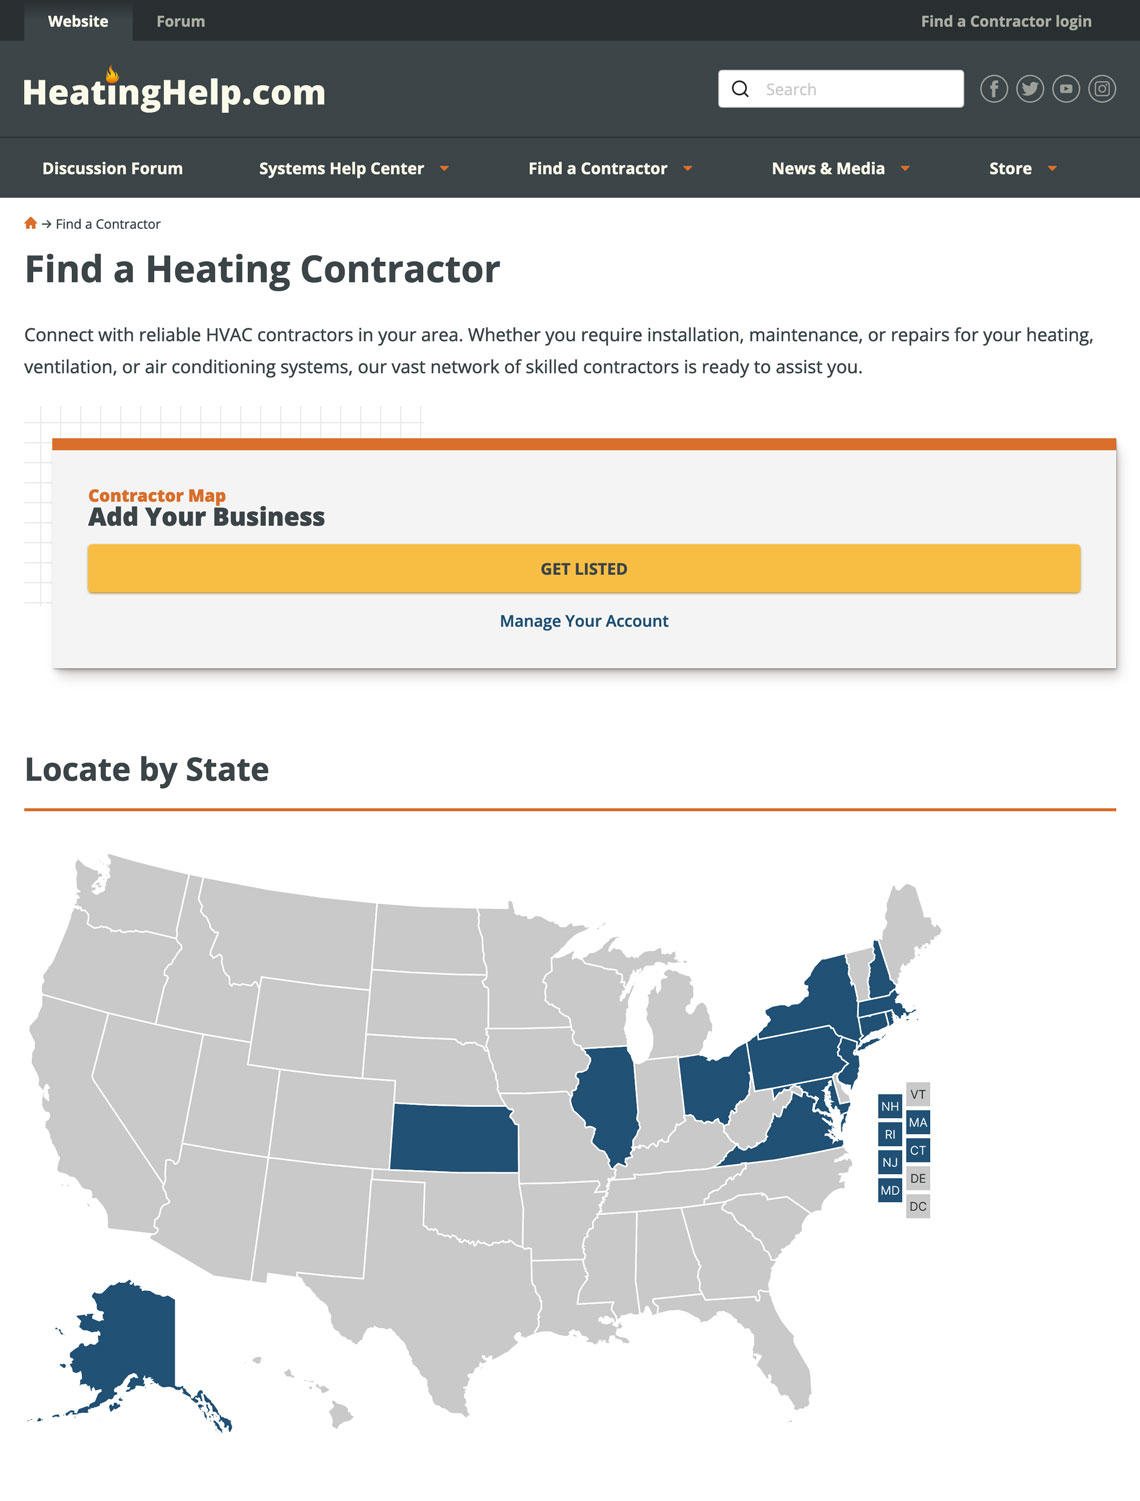 Find a Heating Contractor page with links to get listed and manage your account. A map of the United states with Alaska, Kansas, Illinois, Ohio, Virginia, Pennsylvania, New York, Maryland, New Jersey, Rhode Island, New Hampshire, Massachusets, and Connecticut highlighted.